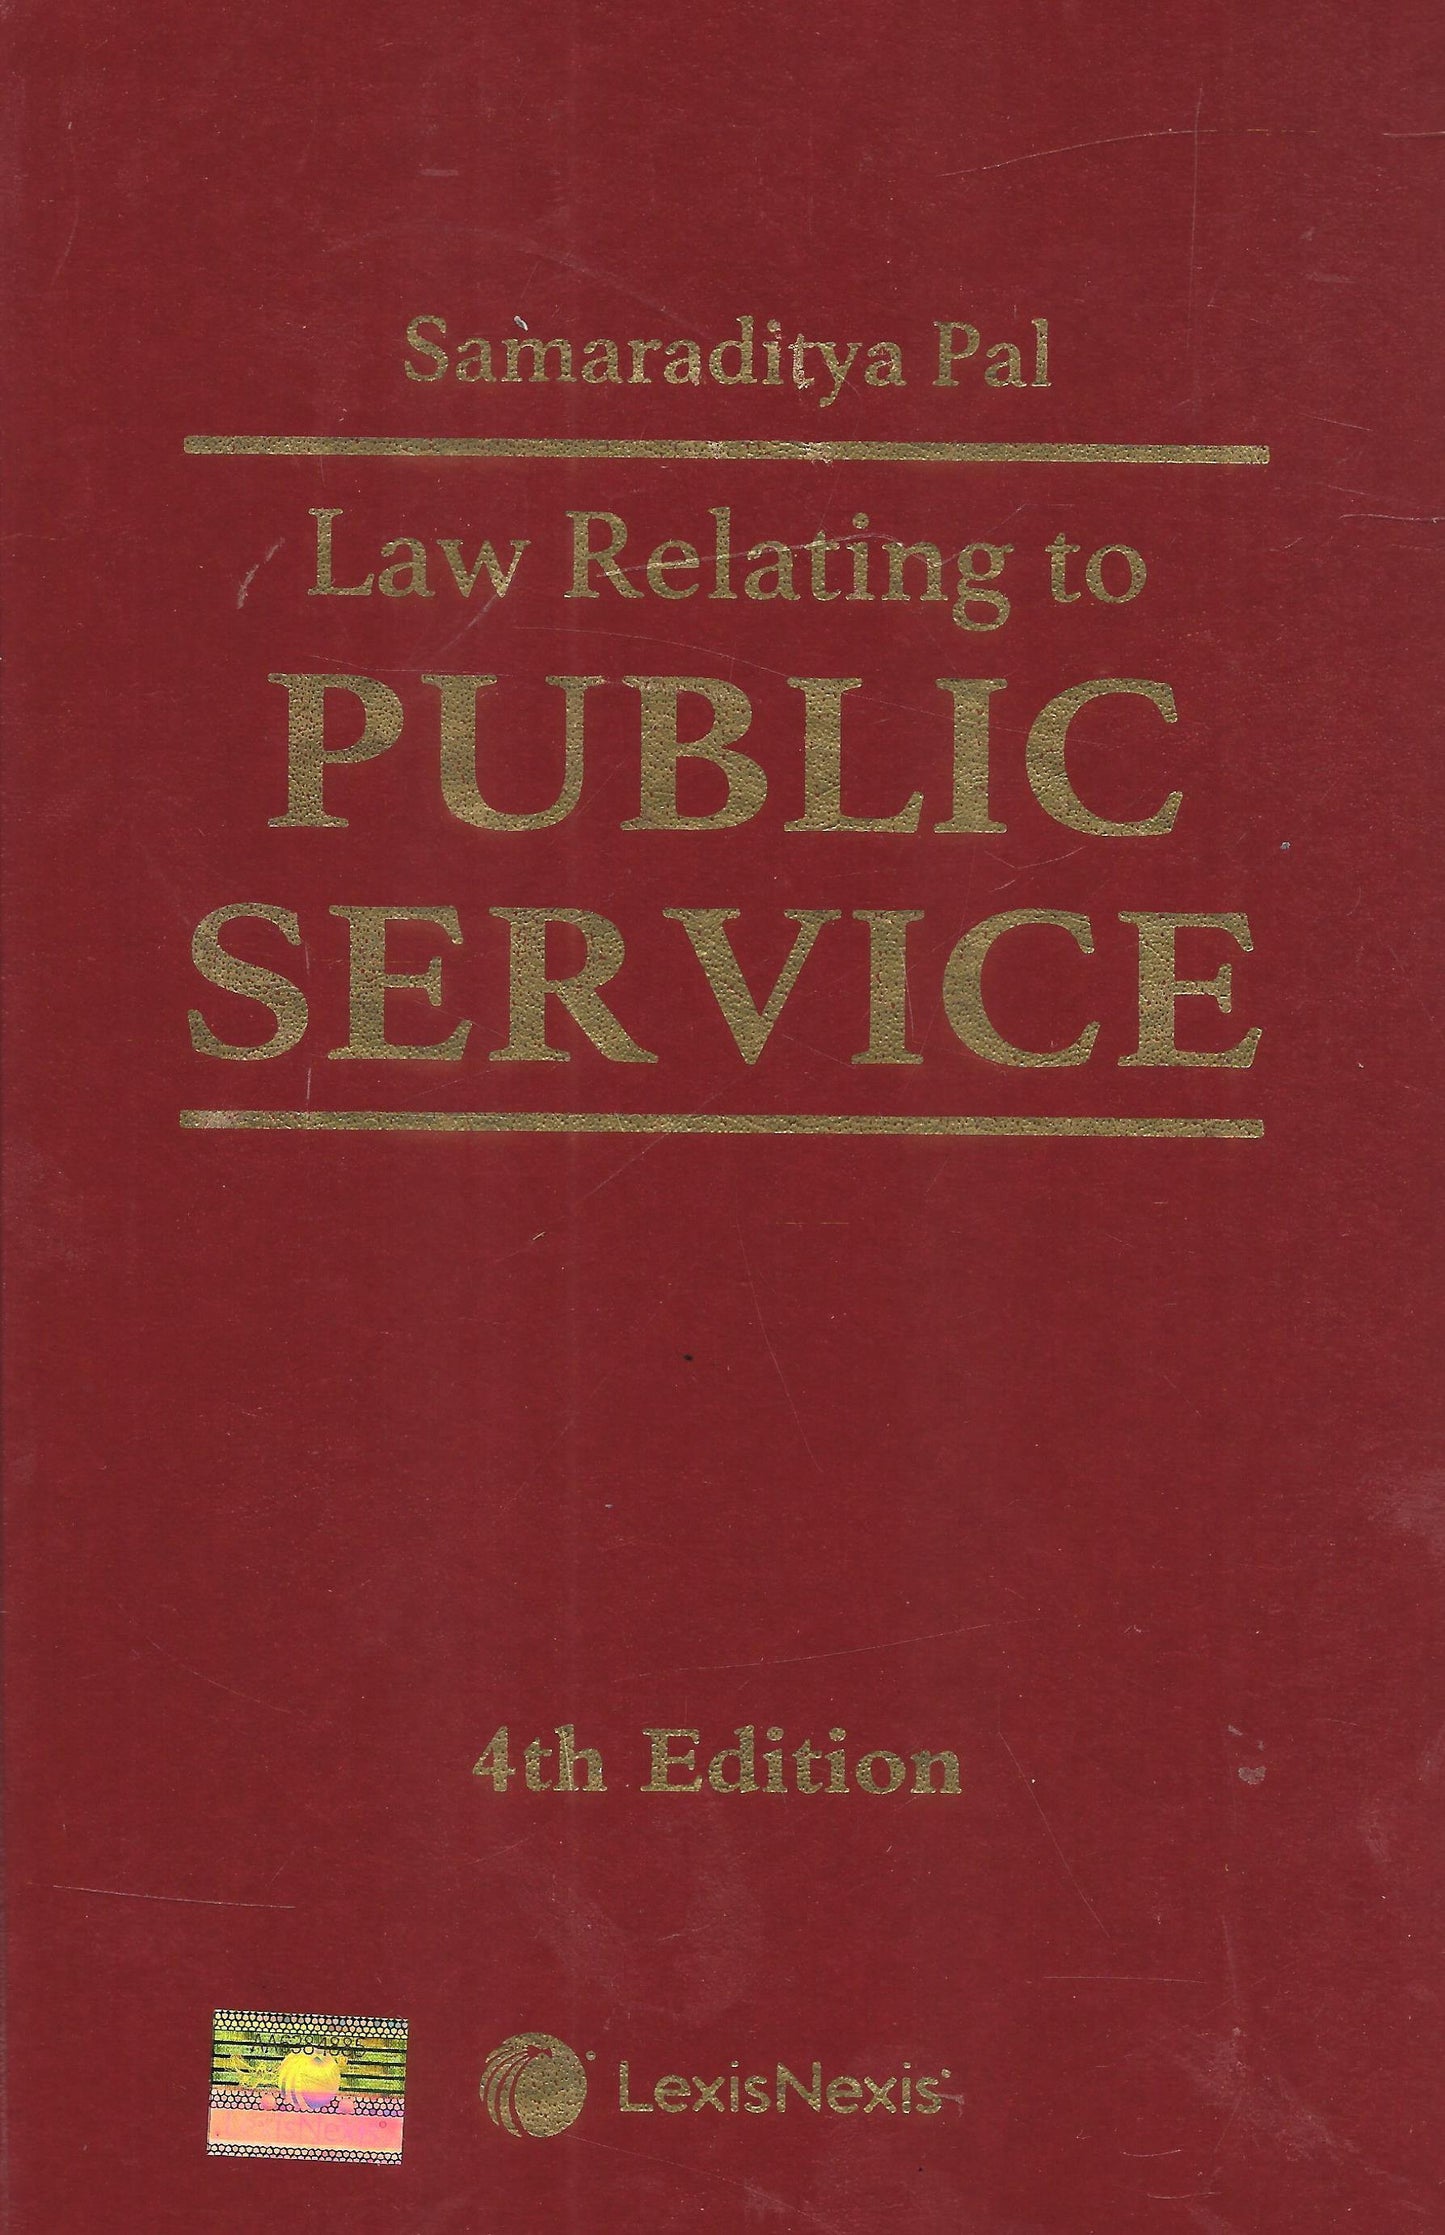 Law Relating to Public Service